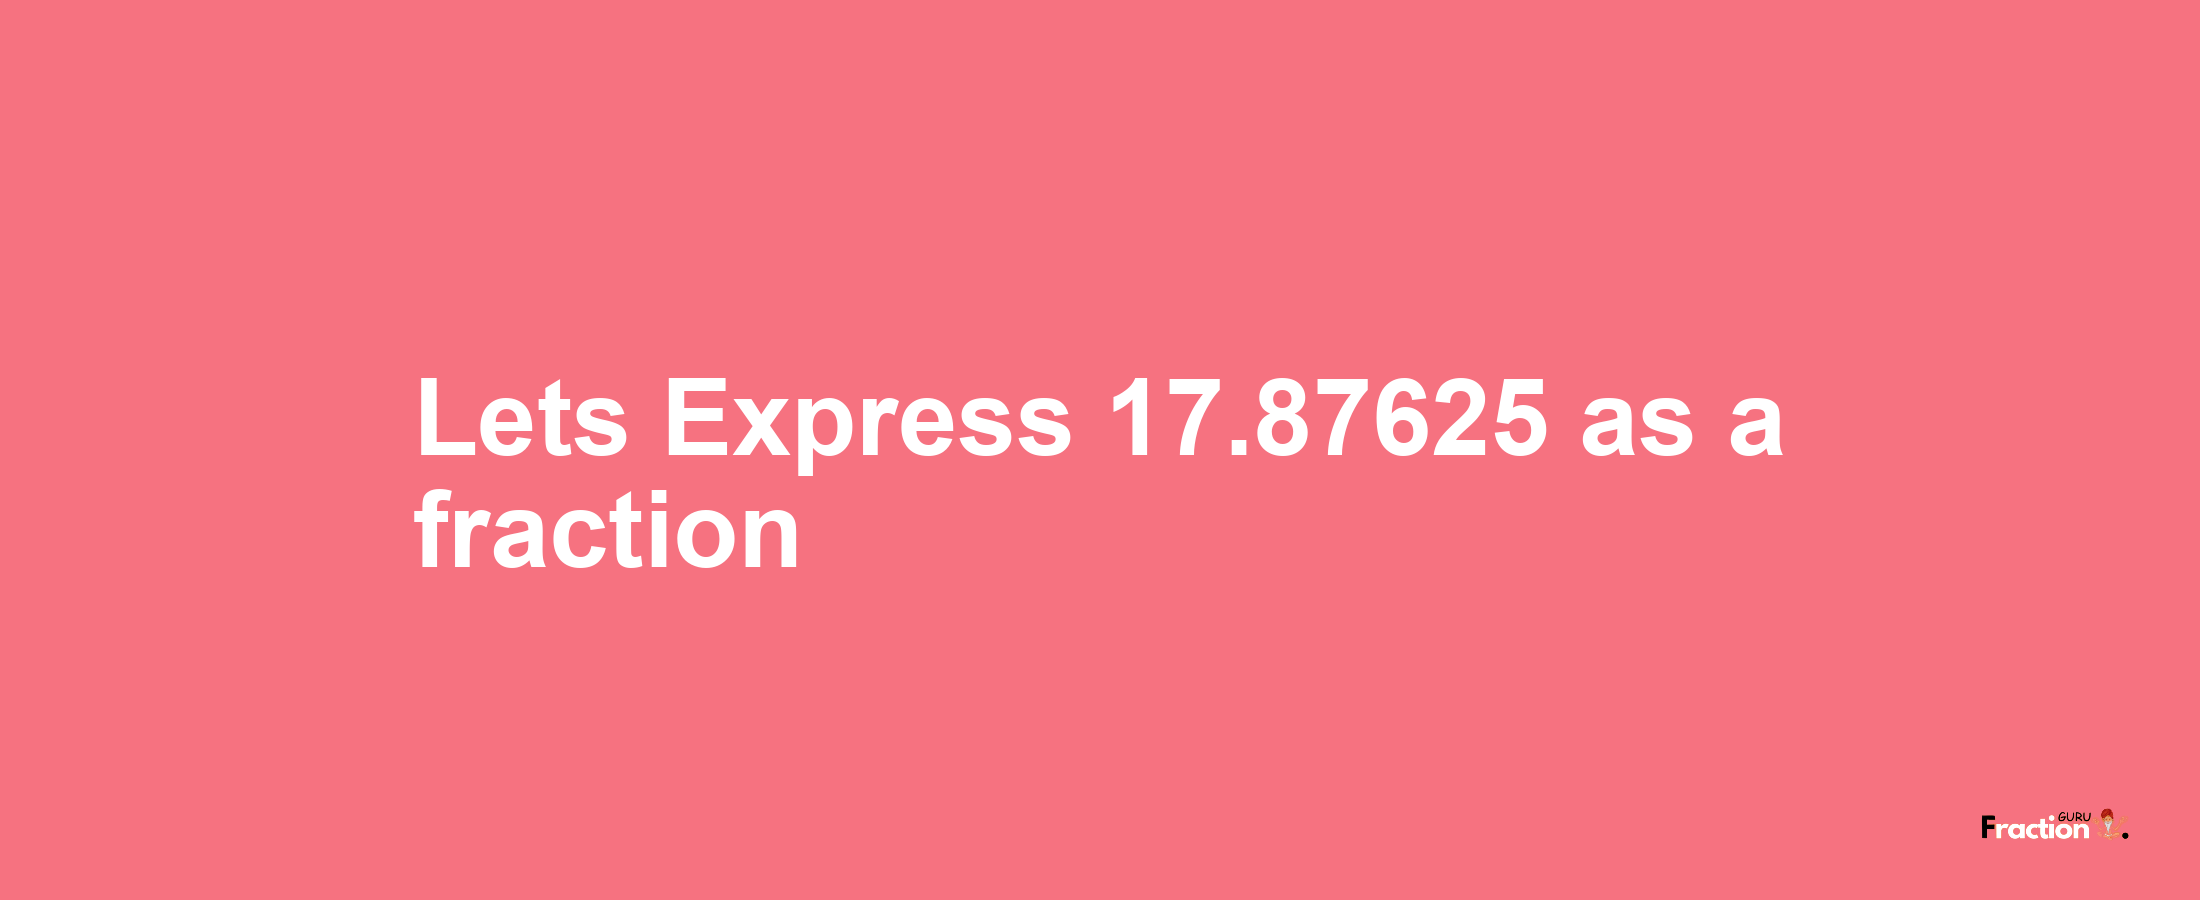 Lets Express 17.87625 as afraction